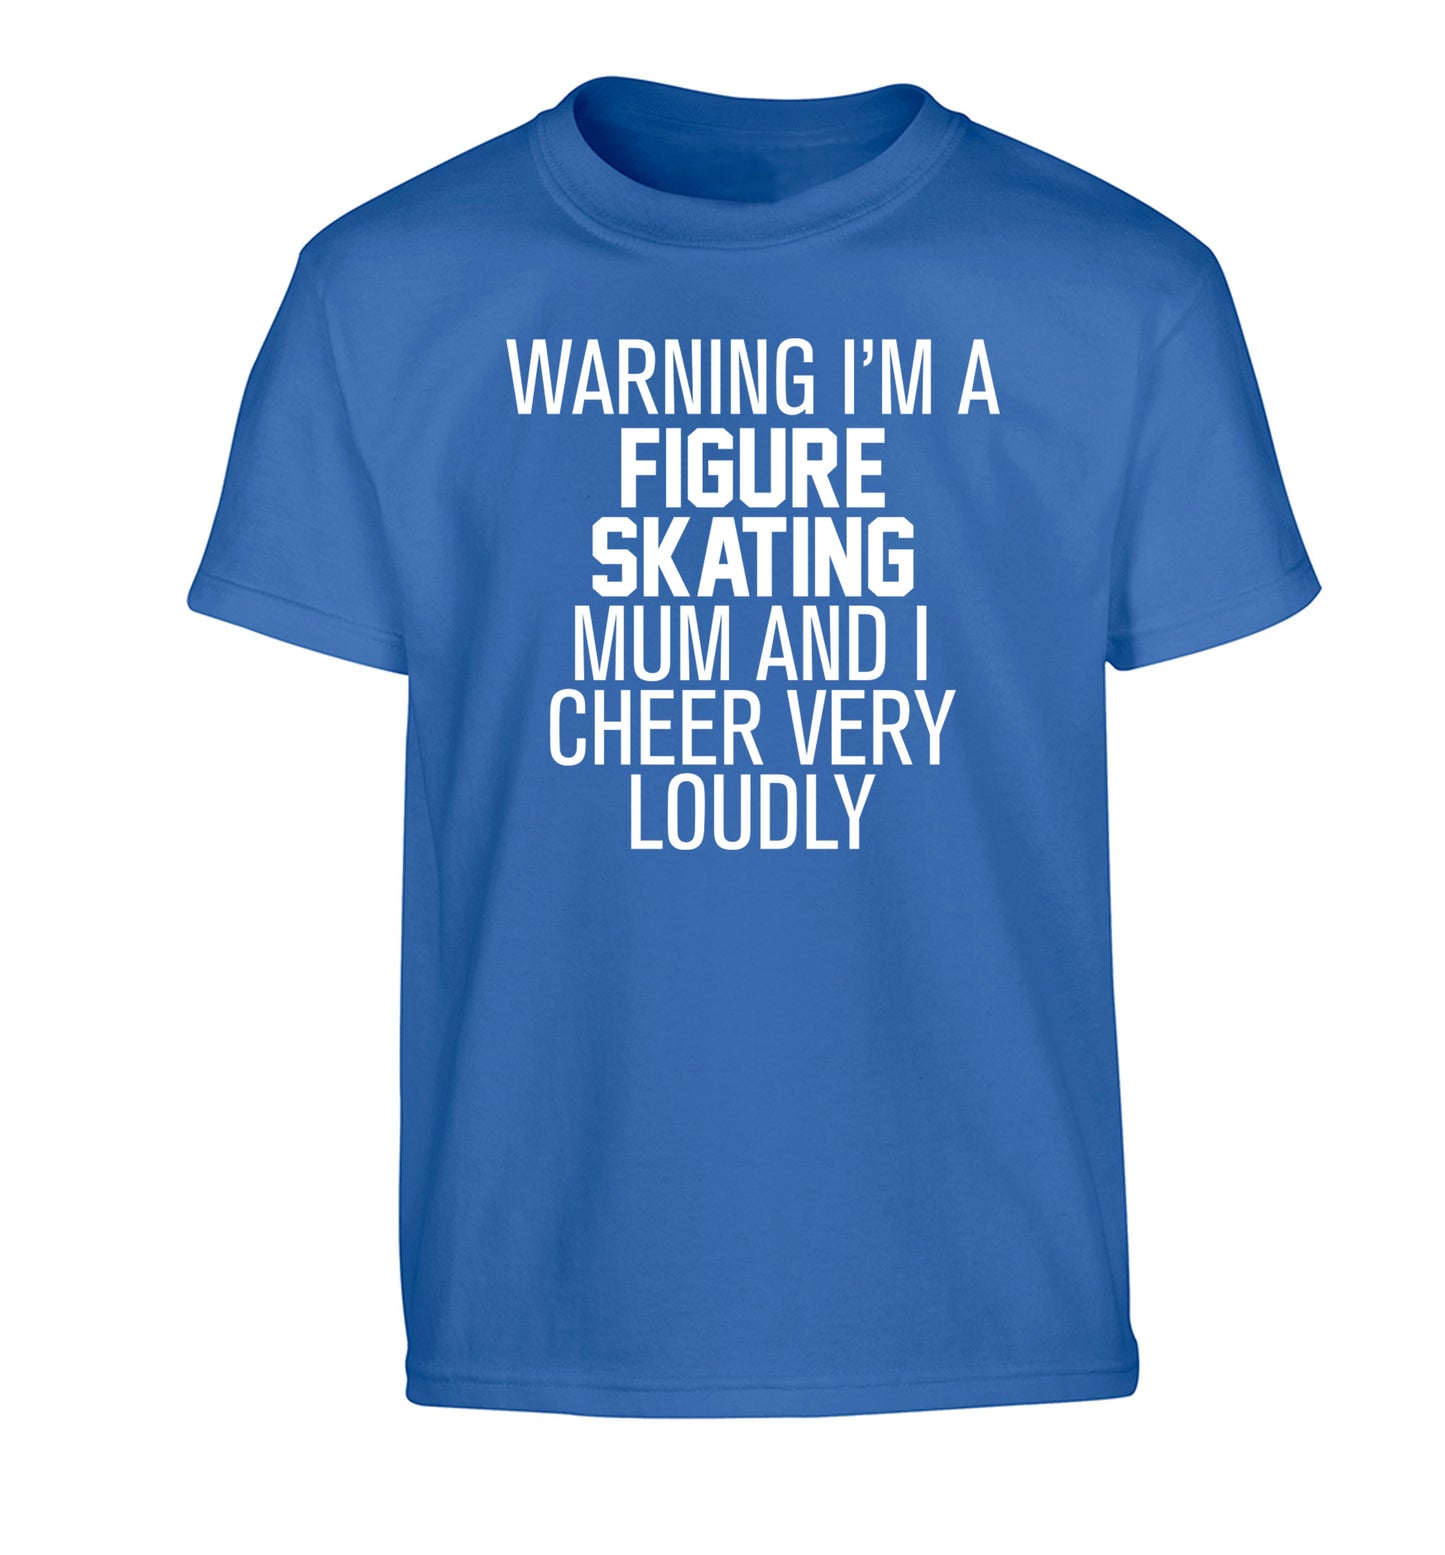 Warning I'm a figure skating mum and I cheer very loudly Children's blue Tshirt 12-14 Years